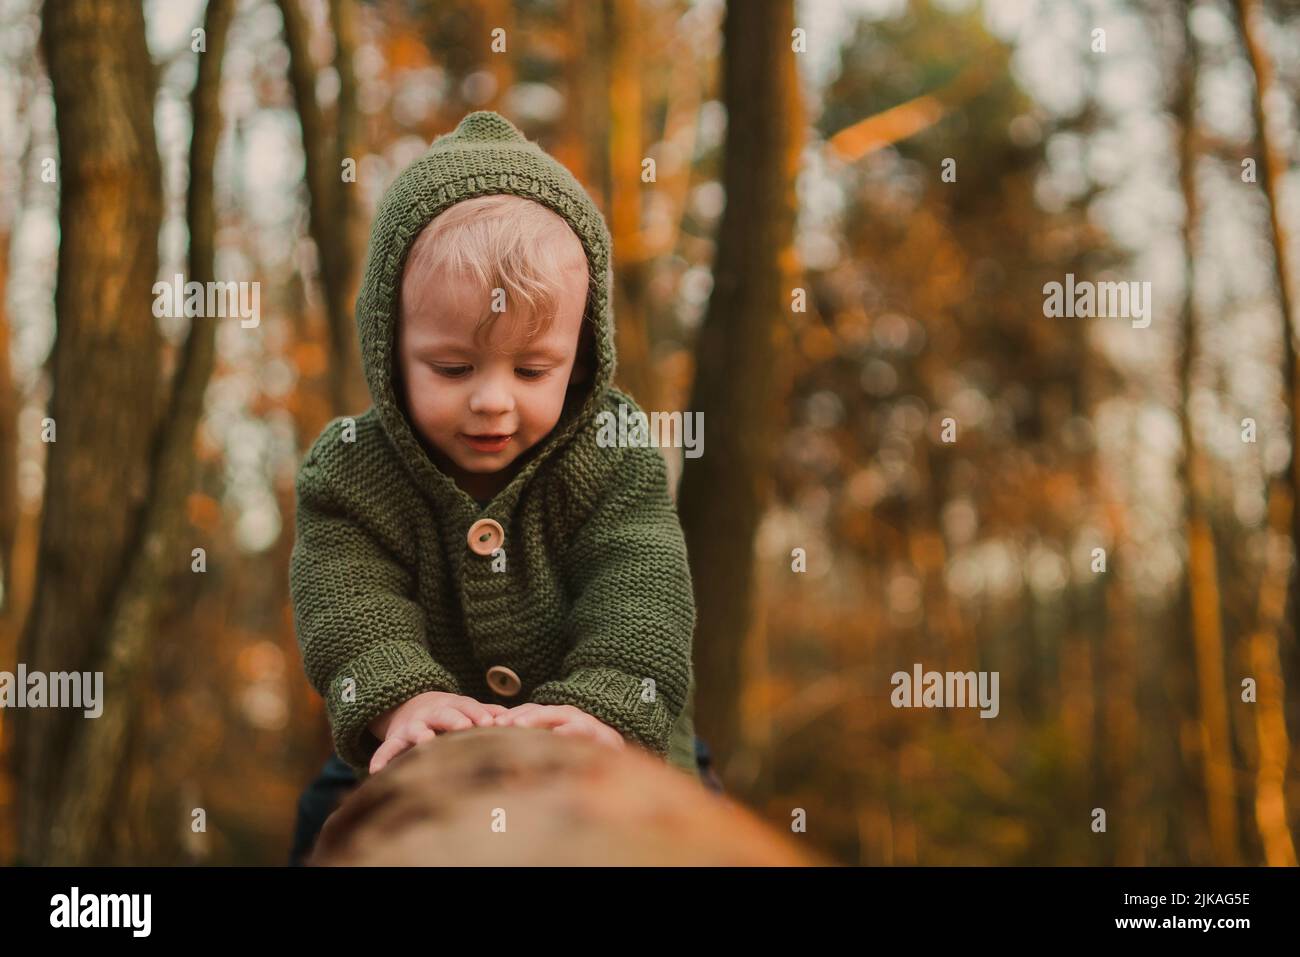 Little curious boy on walk in nature, sitting in tree stump. Stock Photo